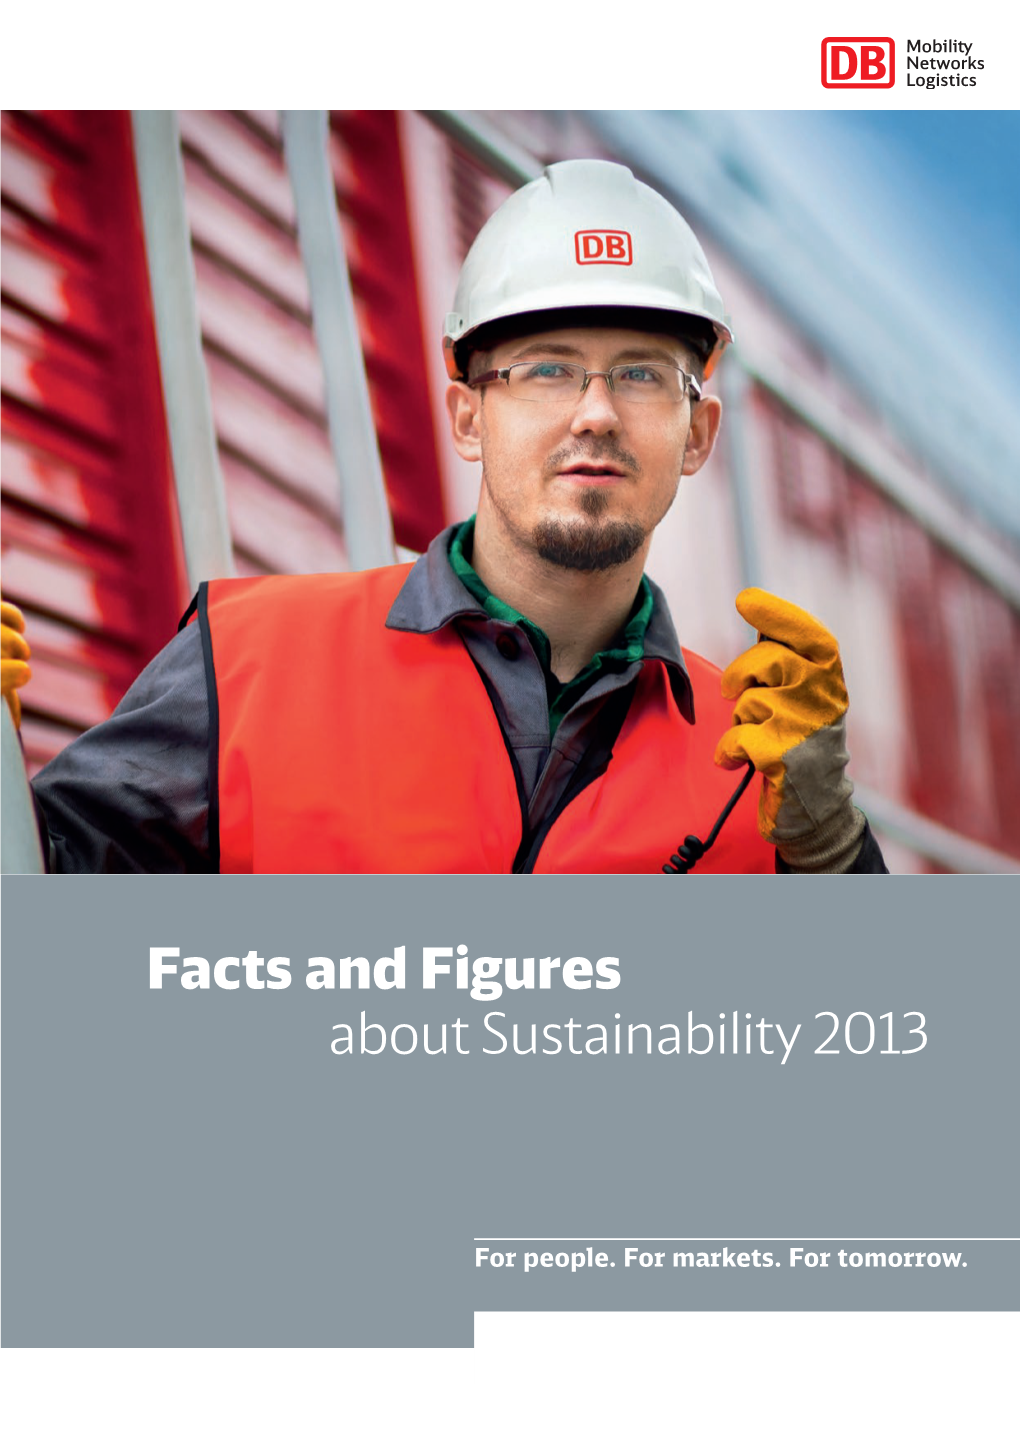 Facts and Figures About Sustainability 2013